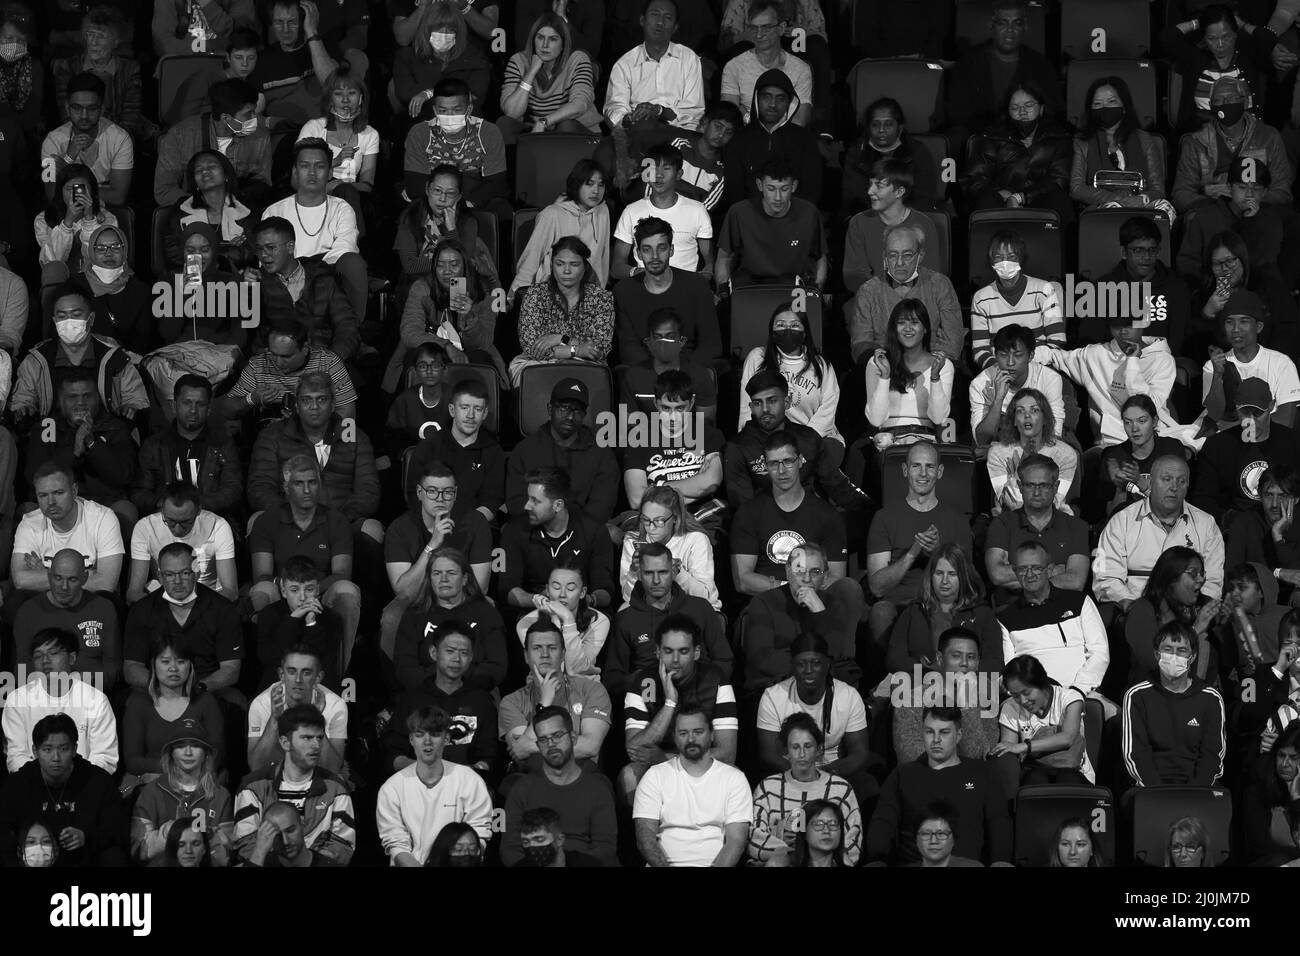 A general view of fans during day four of the YONEX All England Open Badminton Championships at the Utilita Arena Birmingham